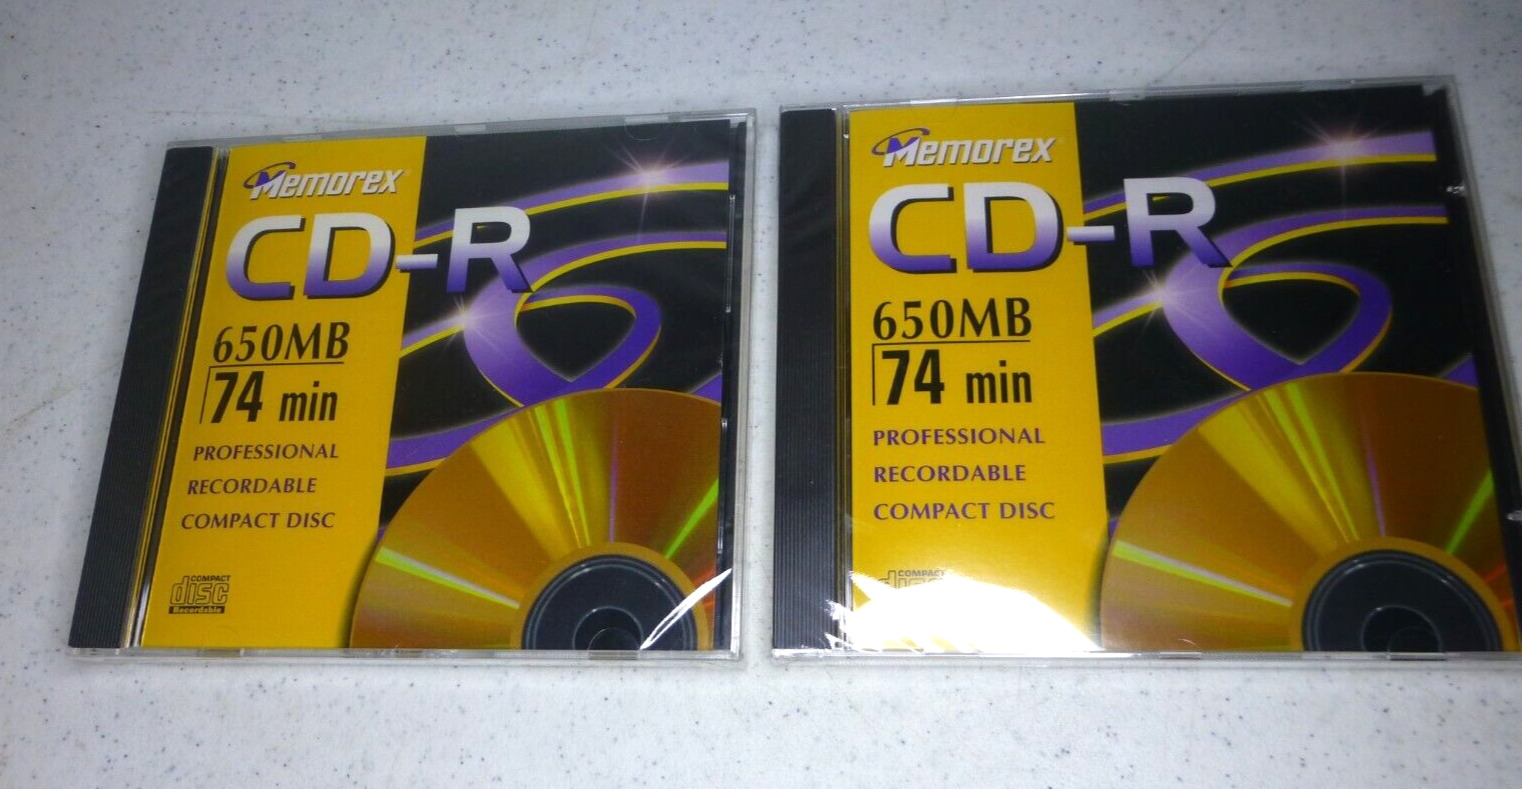 Memorex CD-R 650MB 74 minute Recordable Compact Disc LOT of 2, Factory Sealed